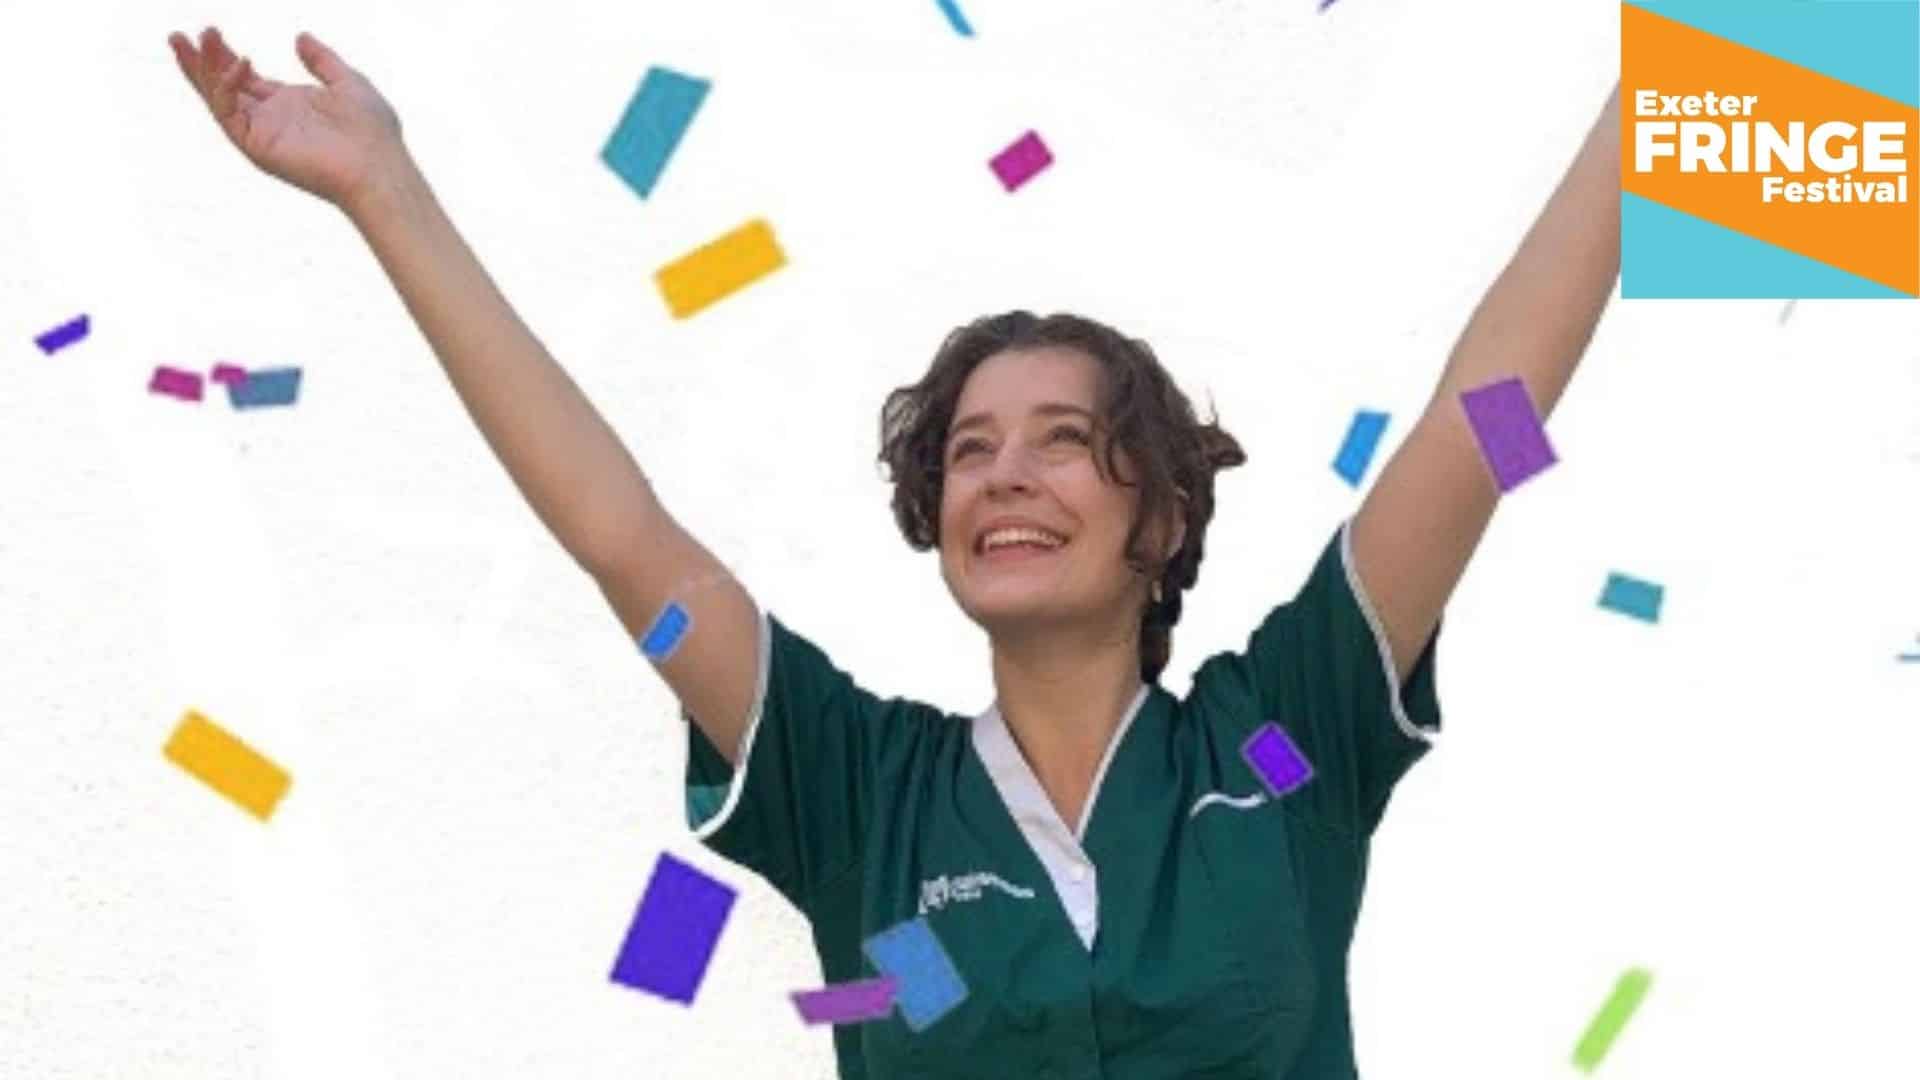 Promotional image for Who Cares Now - featuring a young female health professional throwing colourful confetti up in the air